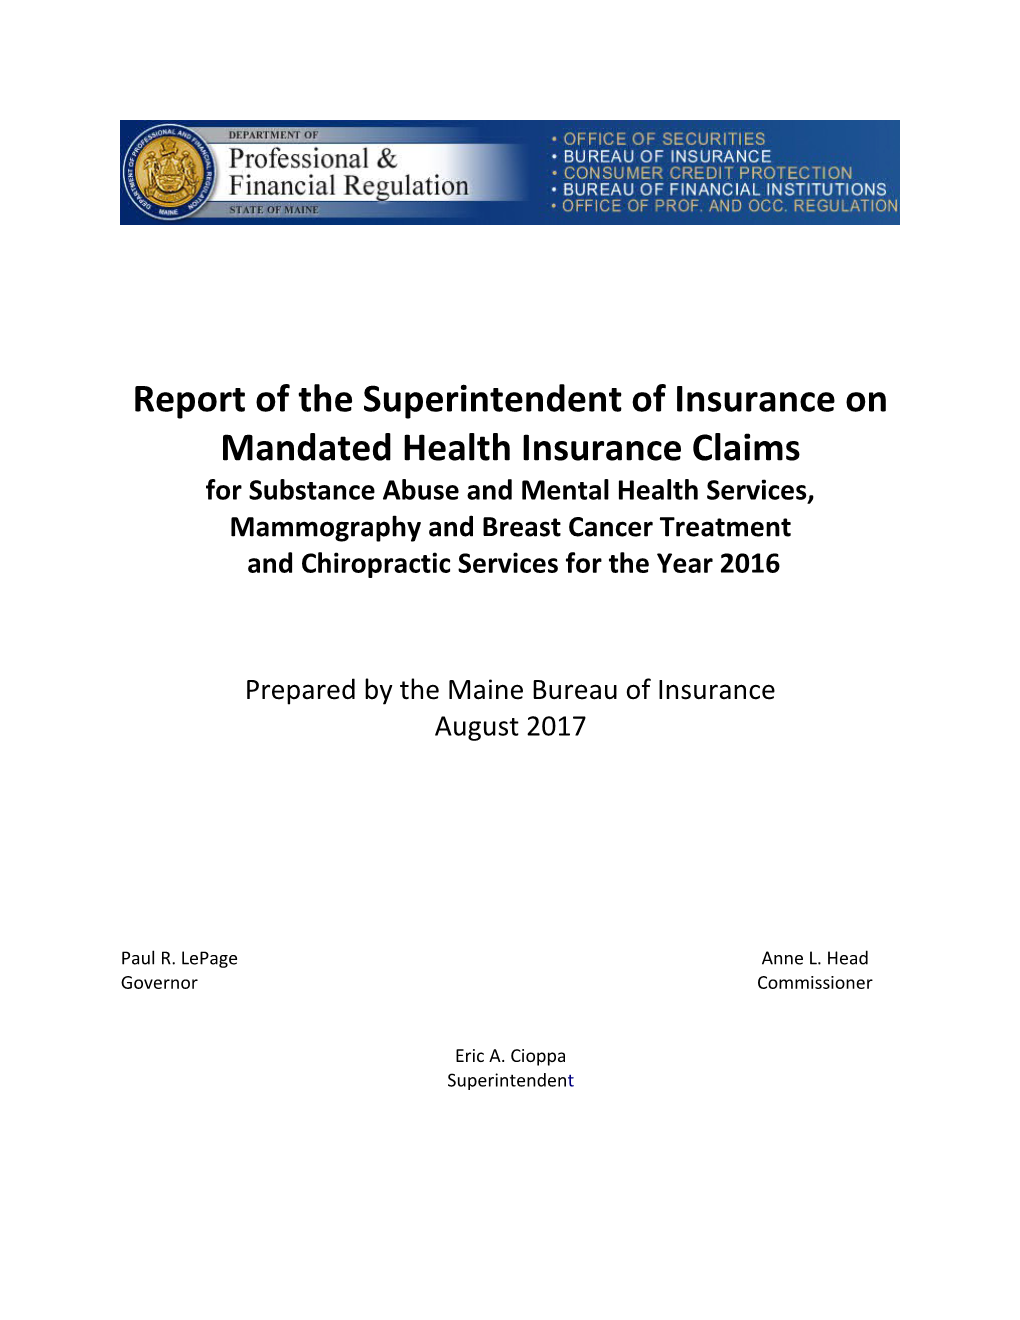 Report of the Superintendent of Insurance on Mandated Health Insurance Claims